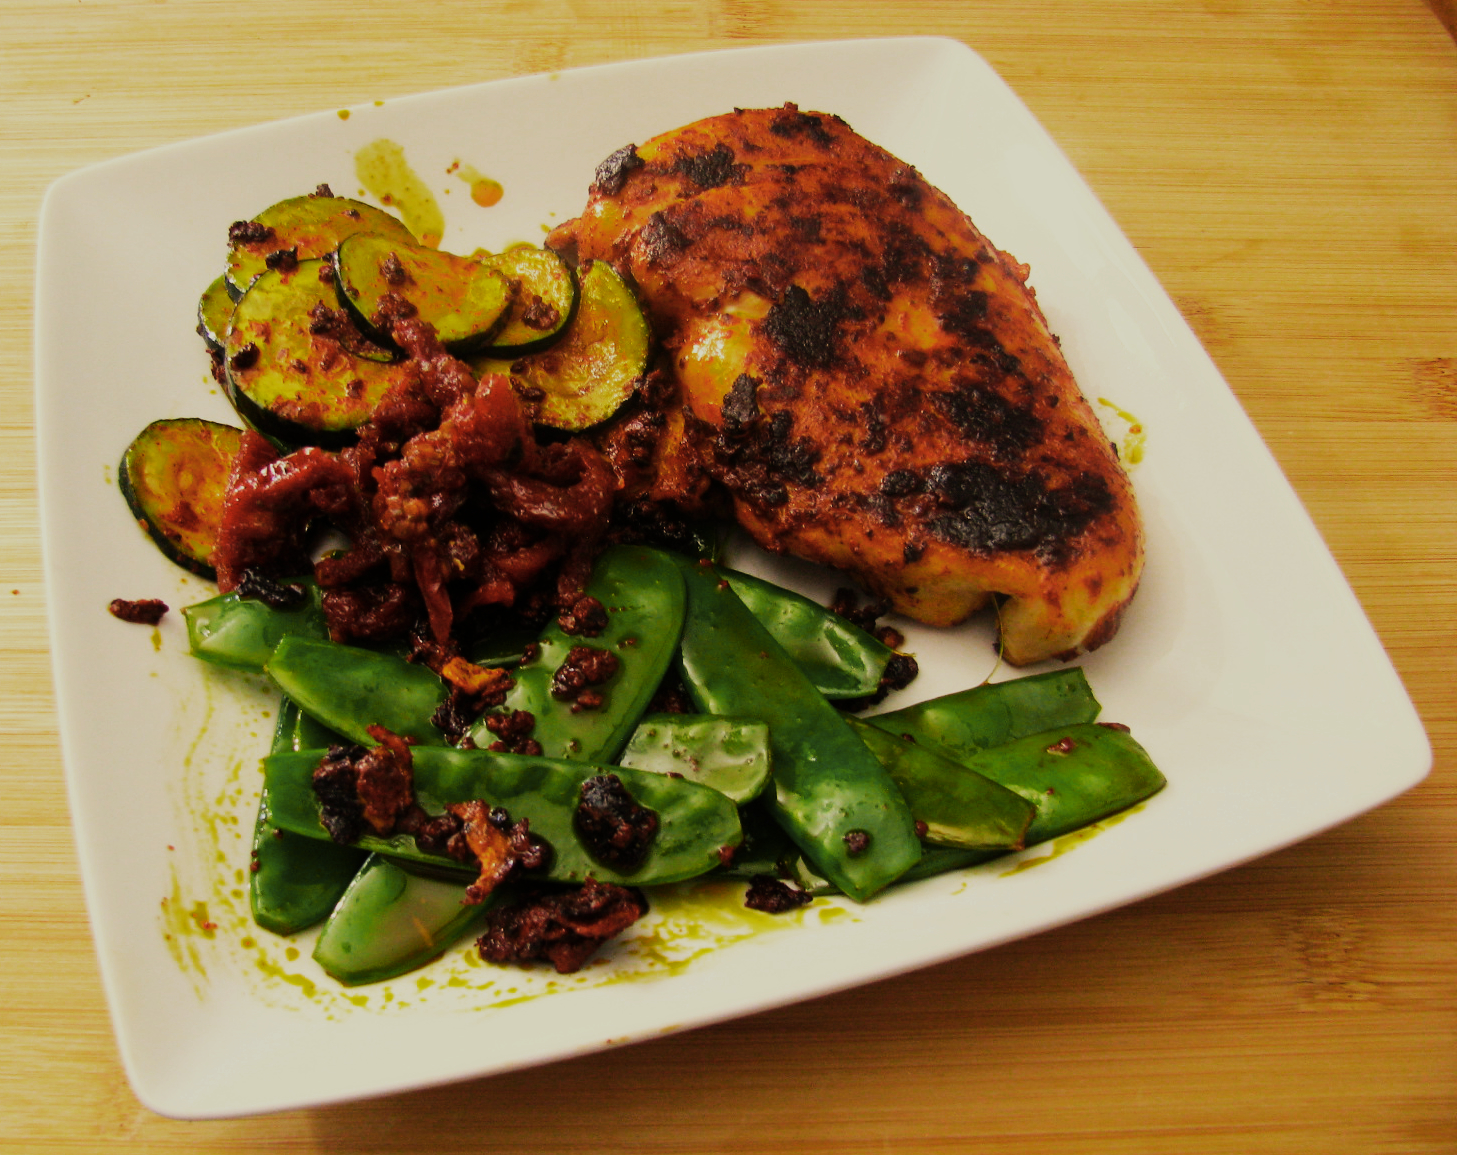 Peach Achiote Rubbed Chicken with Snow Peas and Zucchini